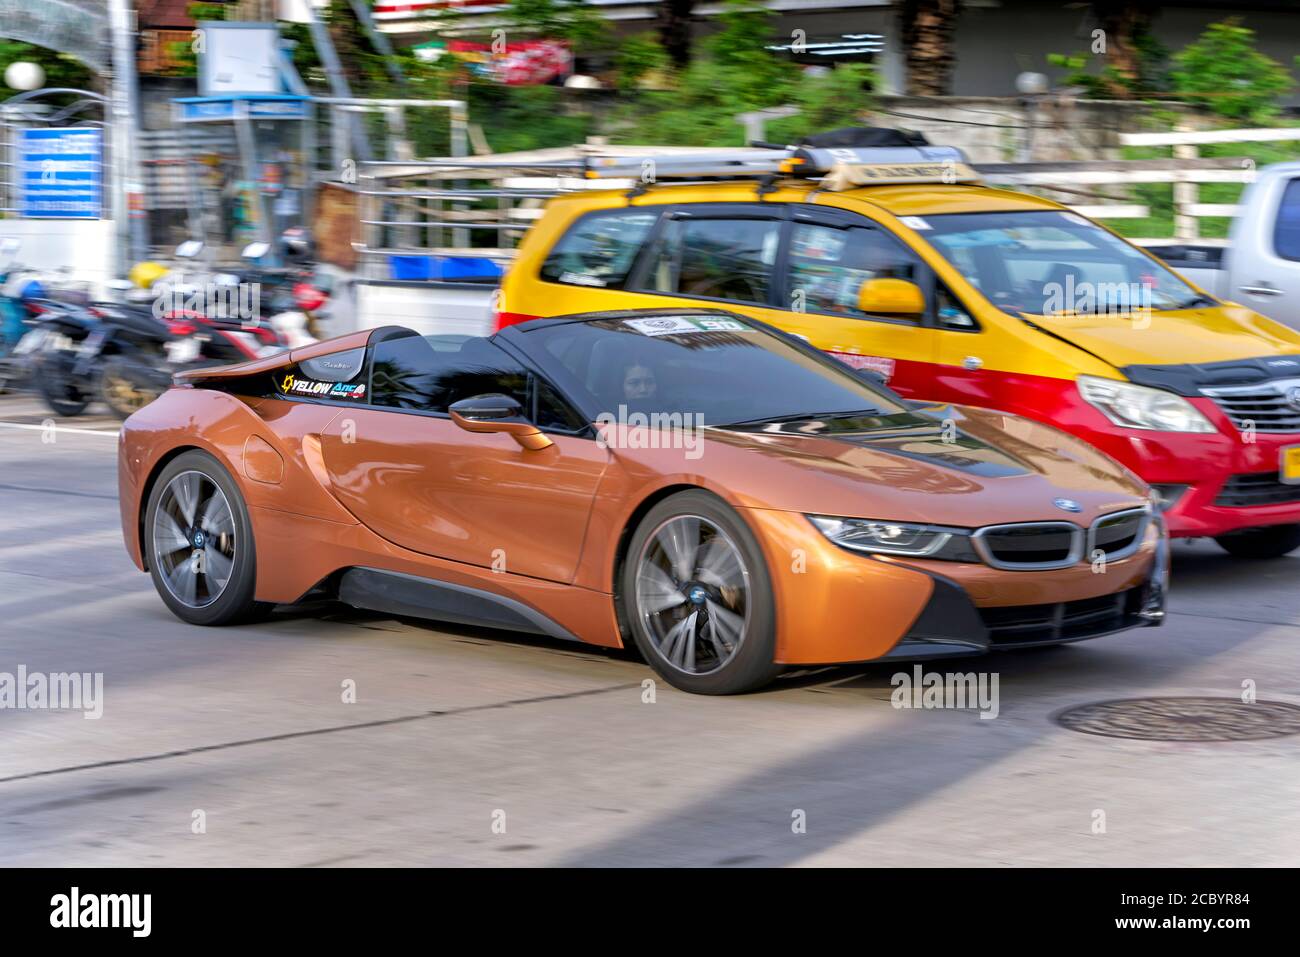 BMW i8 soft-top convertible 2+2 German plug-in hybrid supercar accelerating through traffic. Blur and motion, speeding Stock Photo